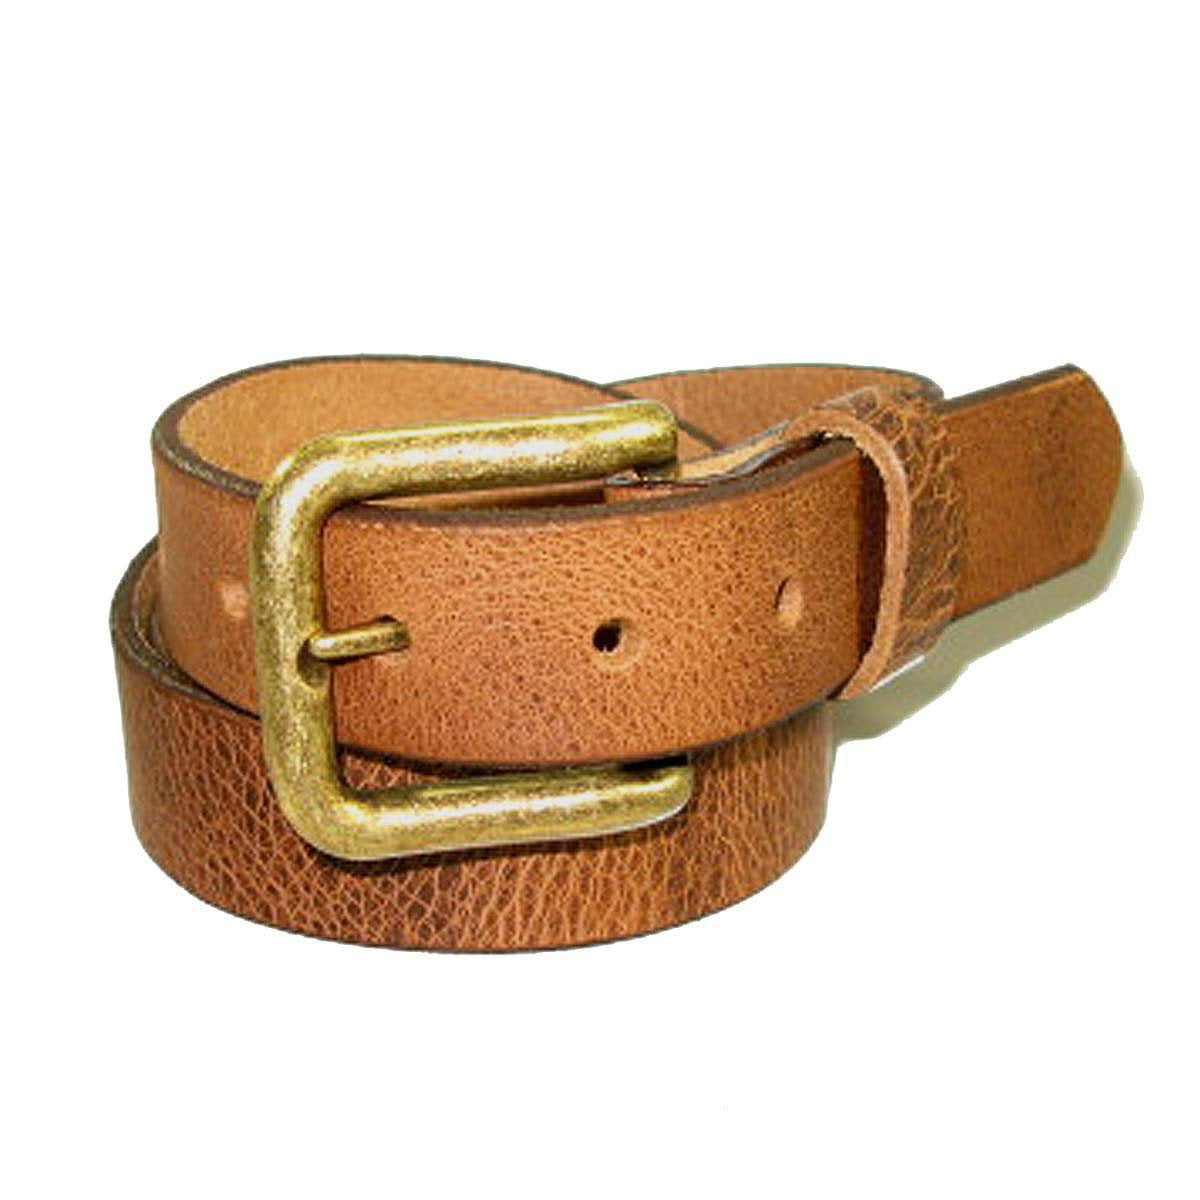 MADE TO ORDER CUSTOM DISTRESSED HANDMADE LEATHER BELT YOU CHOOSE OPTIONS !!